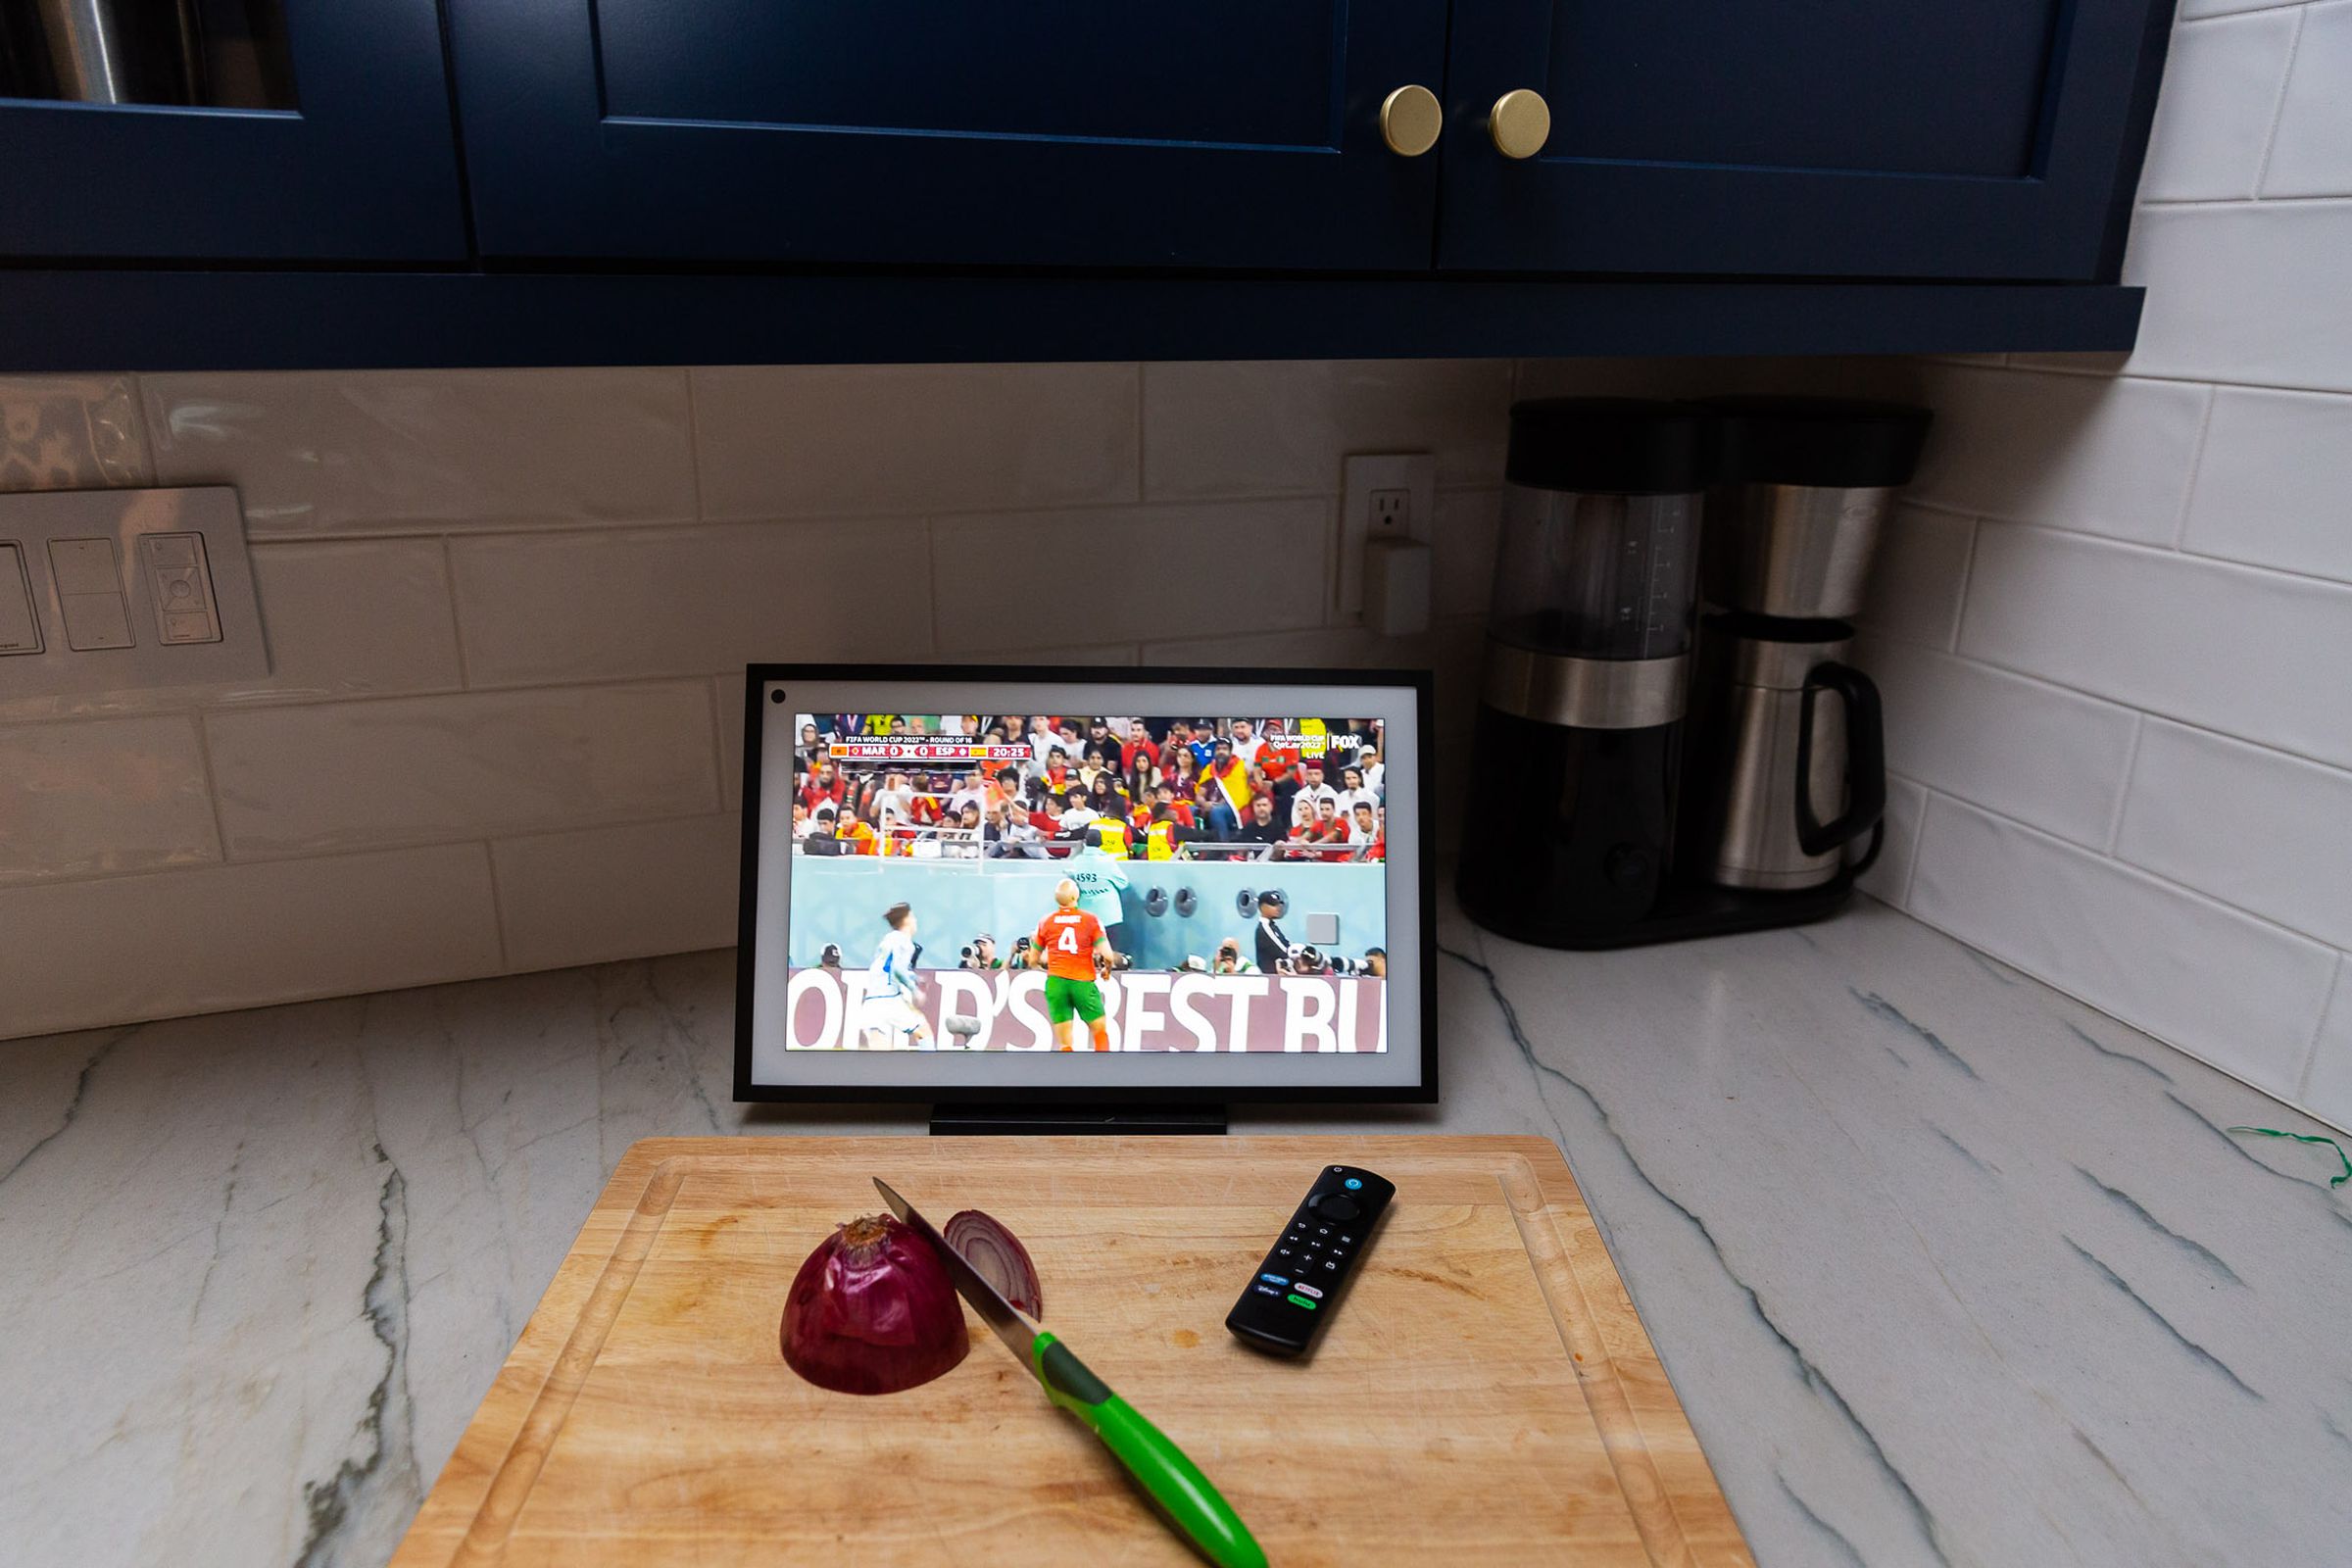 Echo Show devices are especially useful for watching Prime content while you cook or monitoring your smart security cameras.